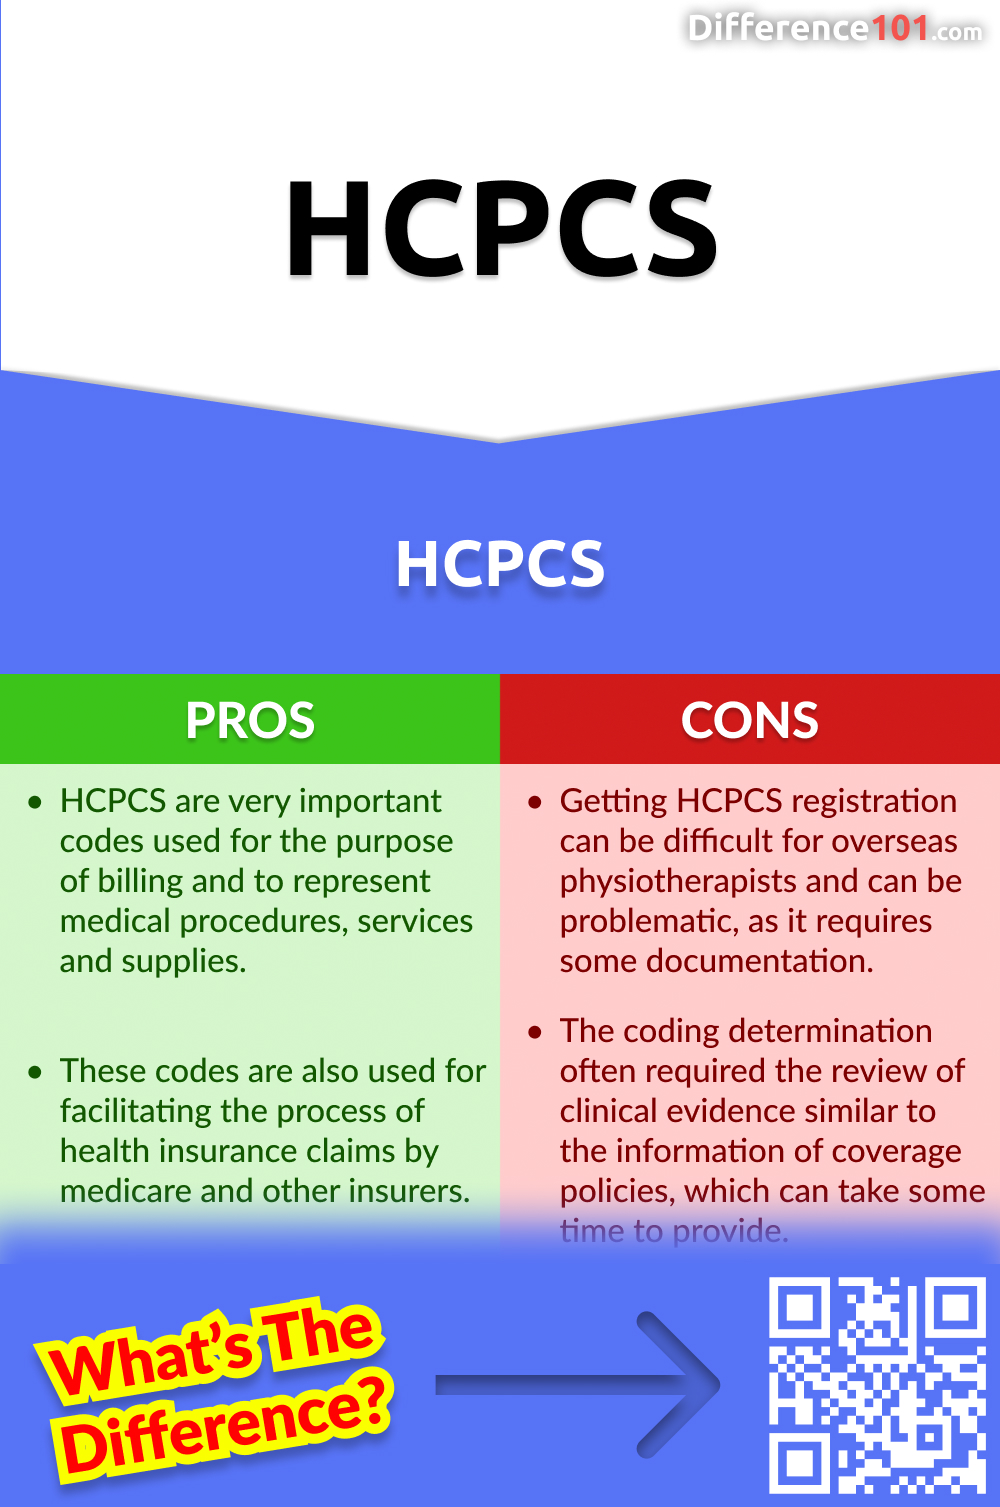 HCPCS Pros and Cons